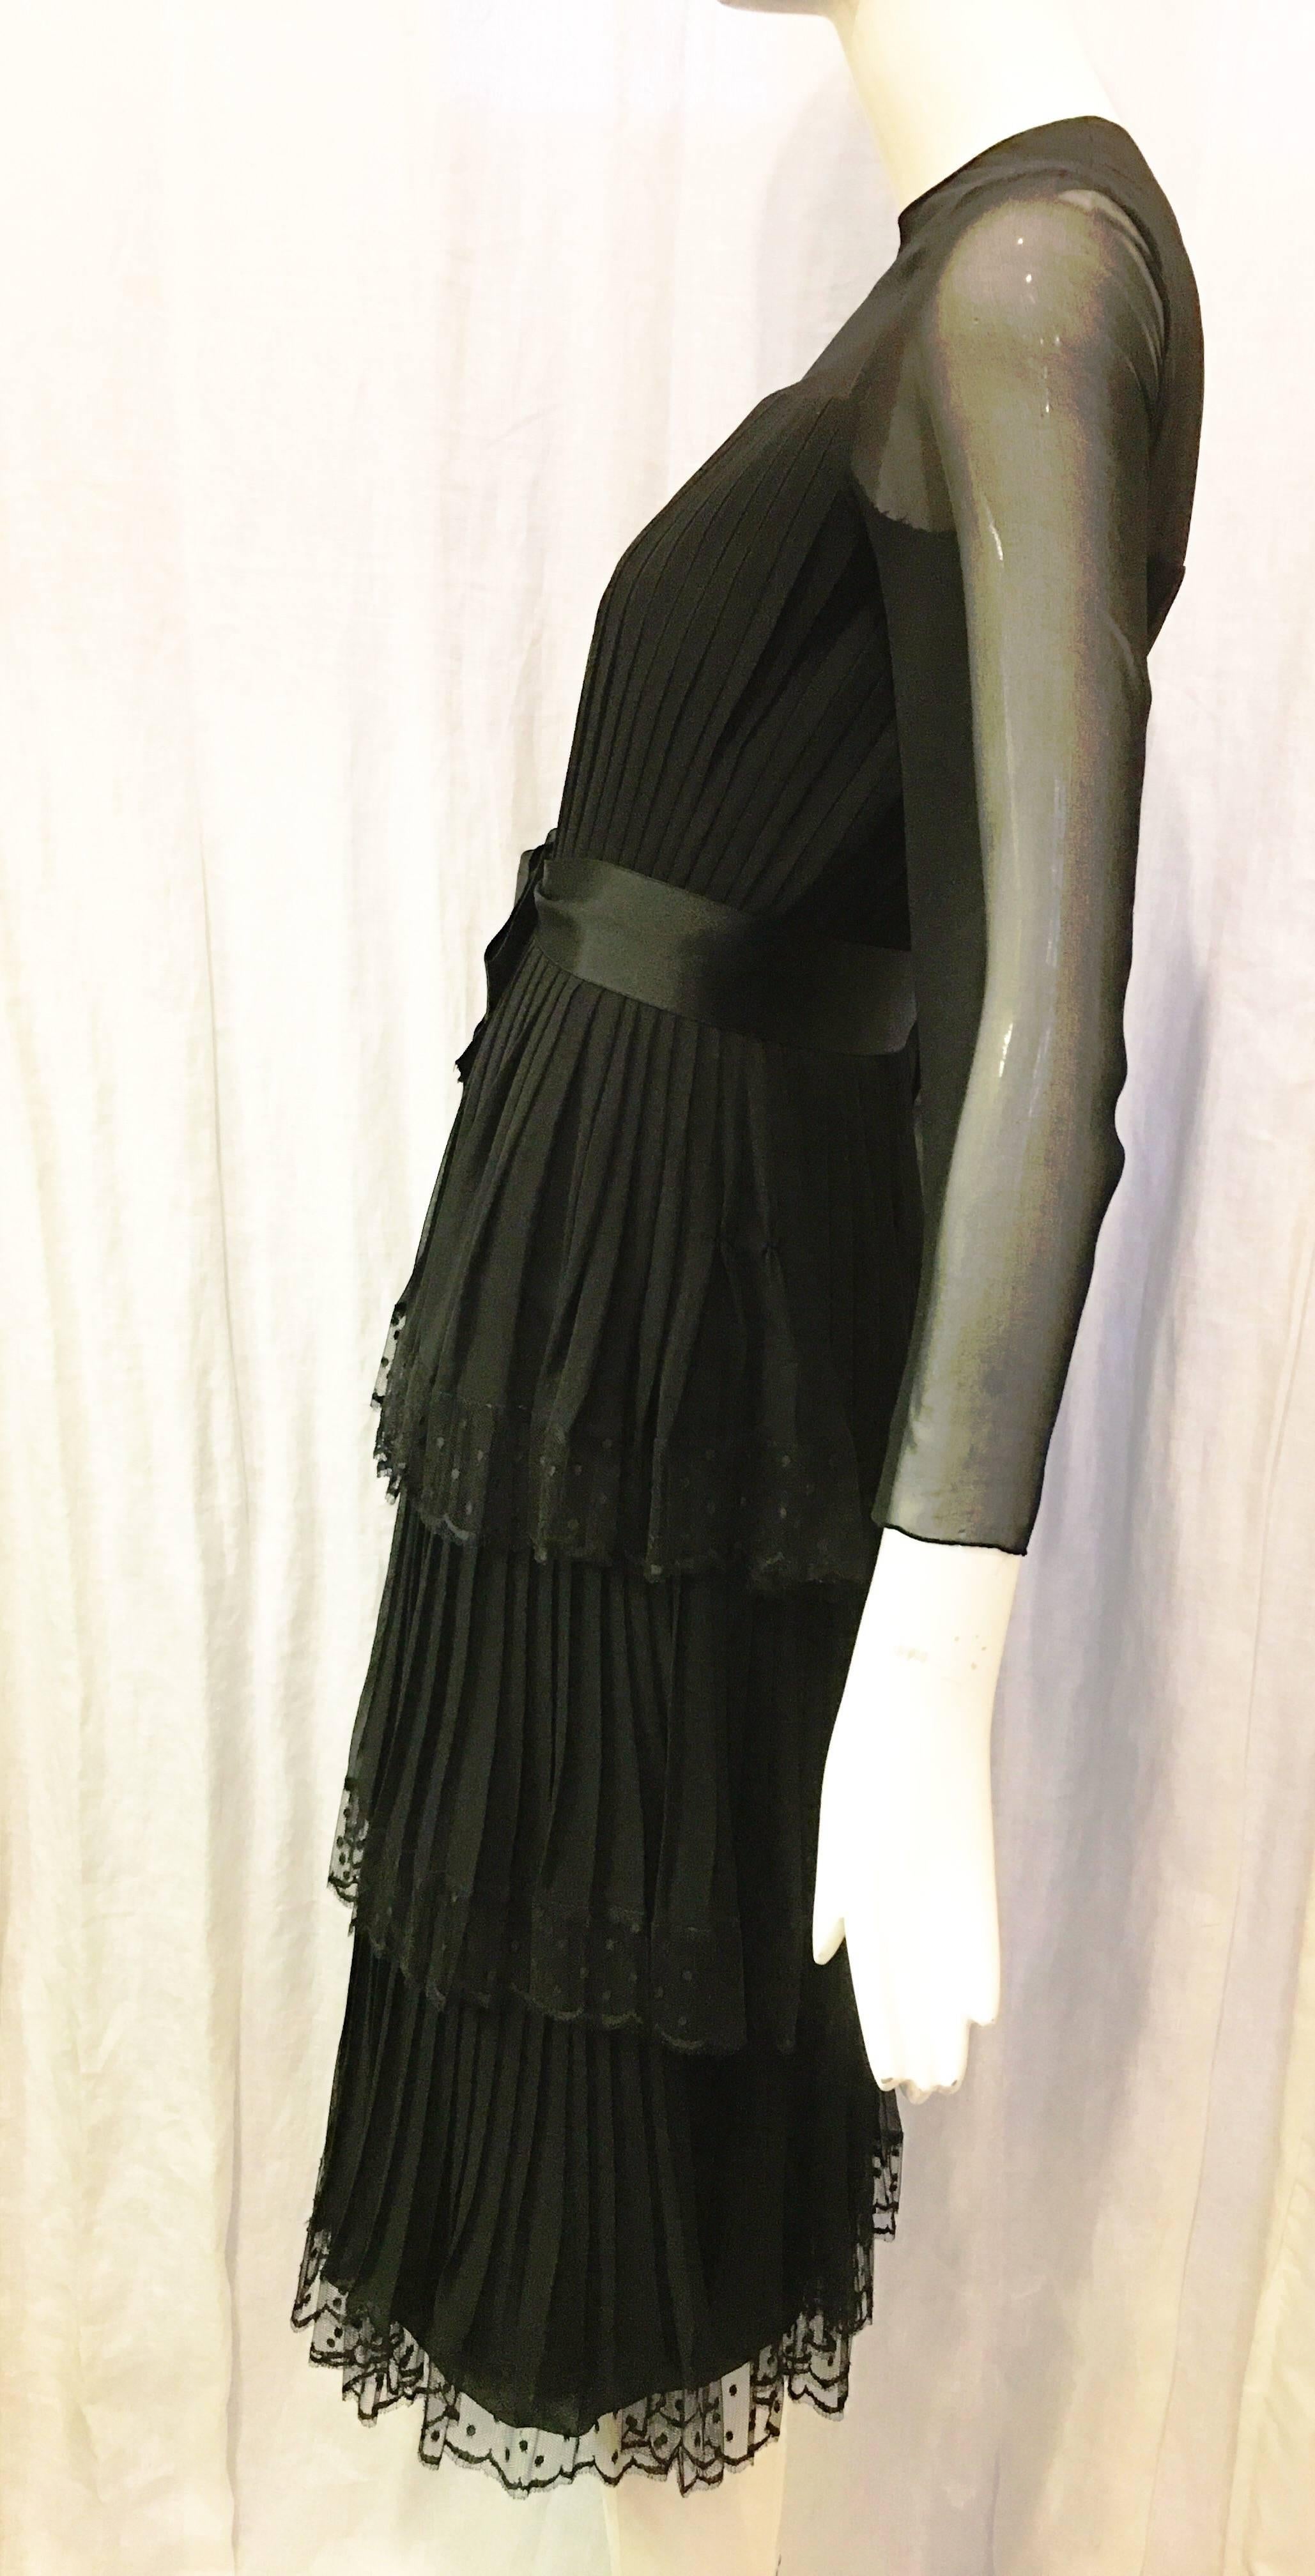 Black silk dress with sheer sleeves lace trim and waist bow belt detail. Bow belt closes at front with snap button and hook and eye closure. Dress is fully lined. Bottom of dress is tiered with three tiers, each of which is trimmed with lace. A